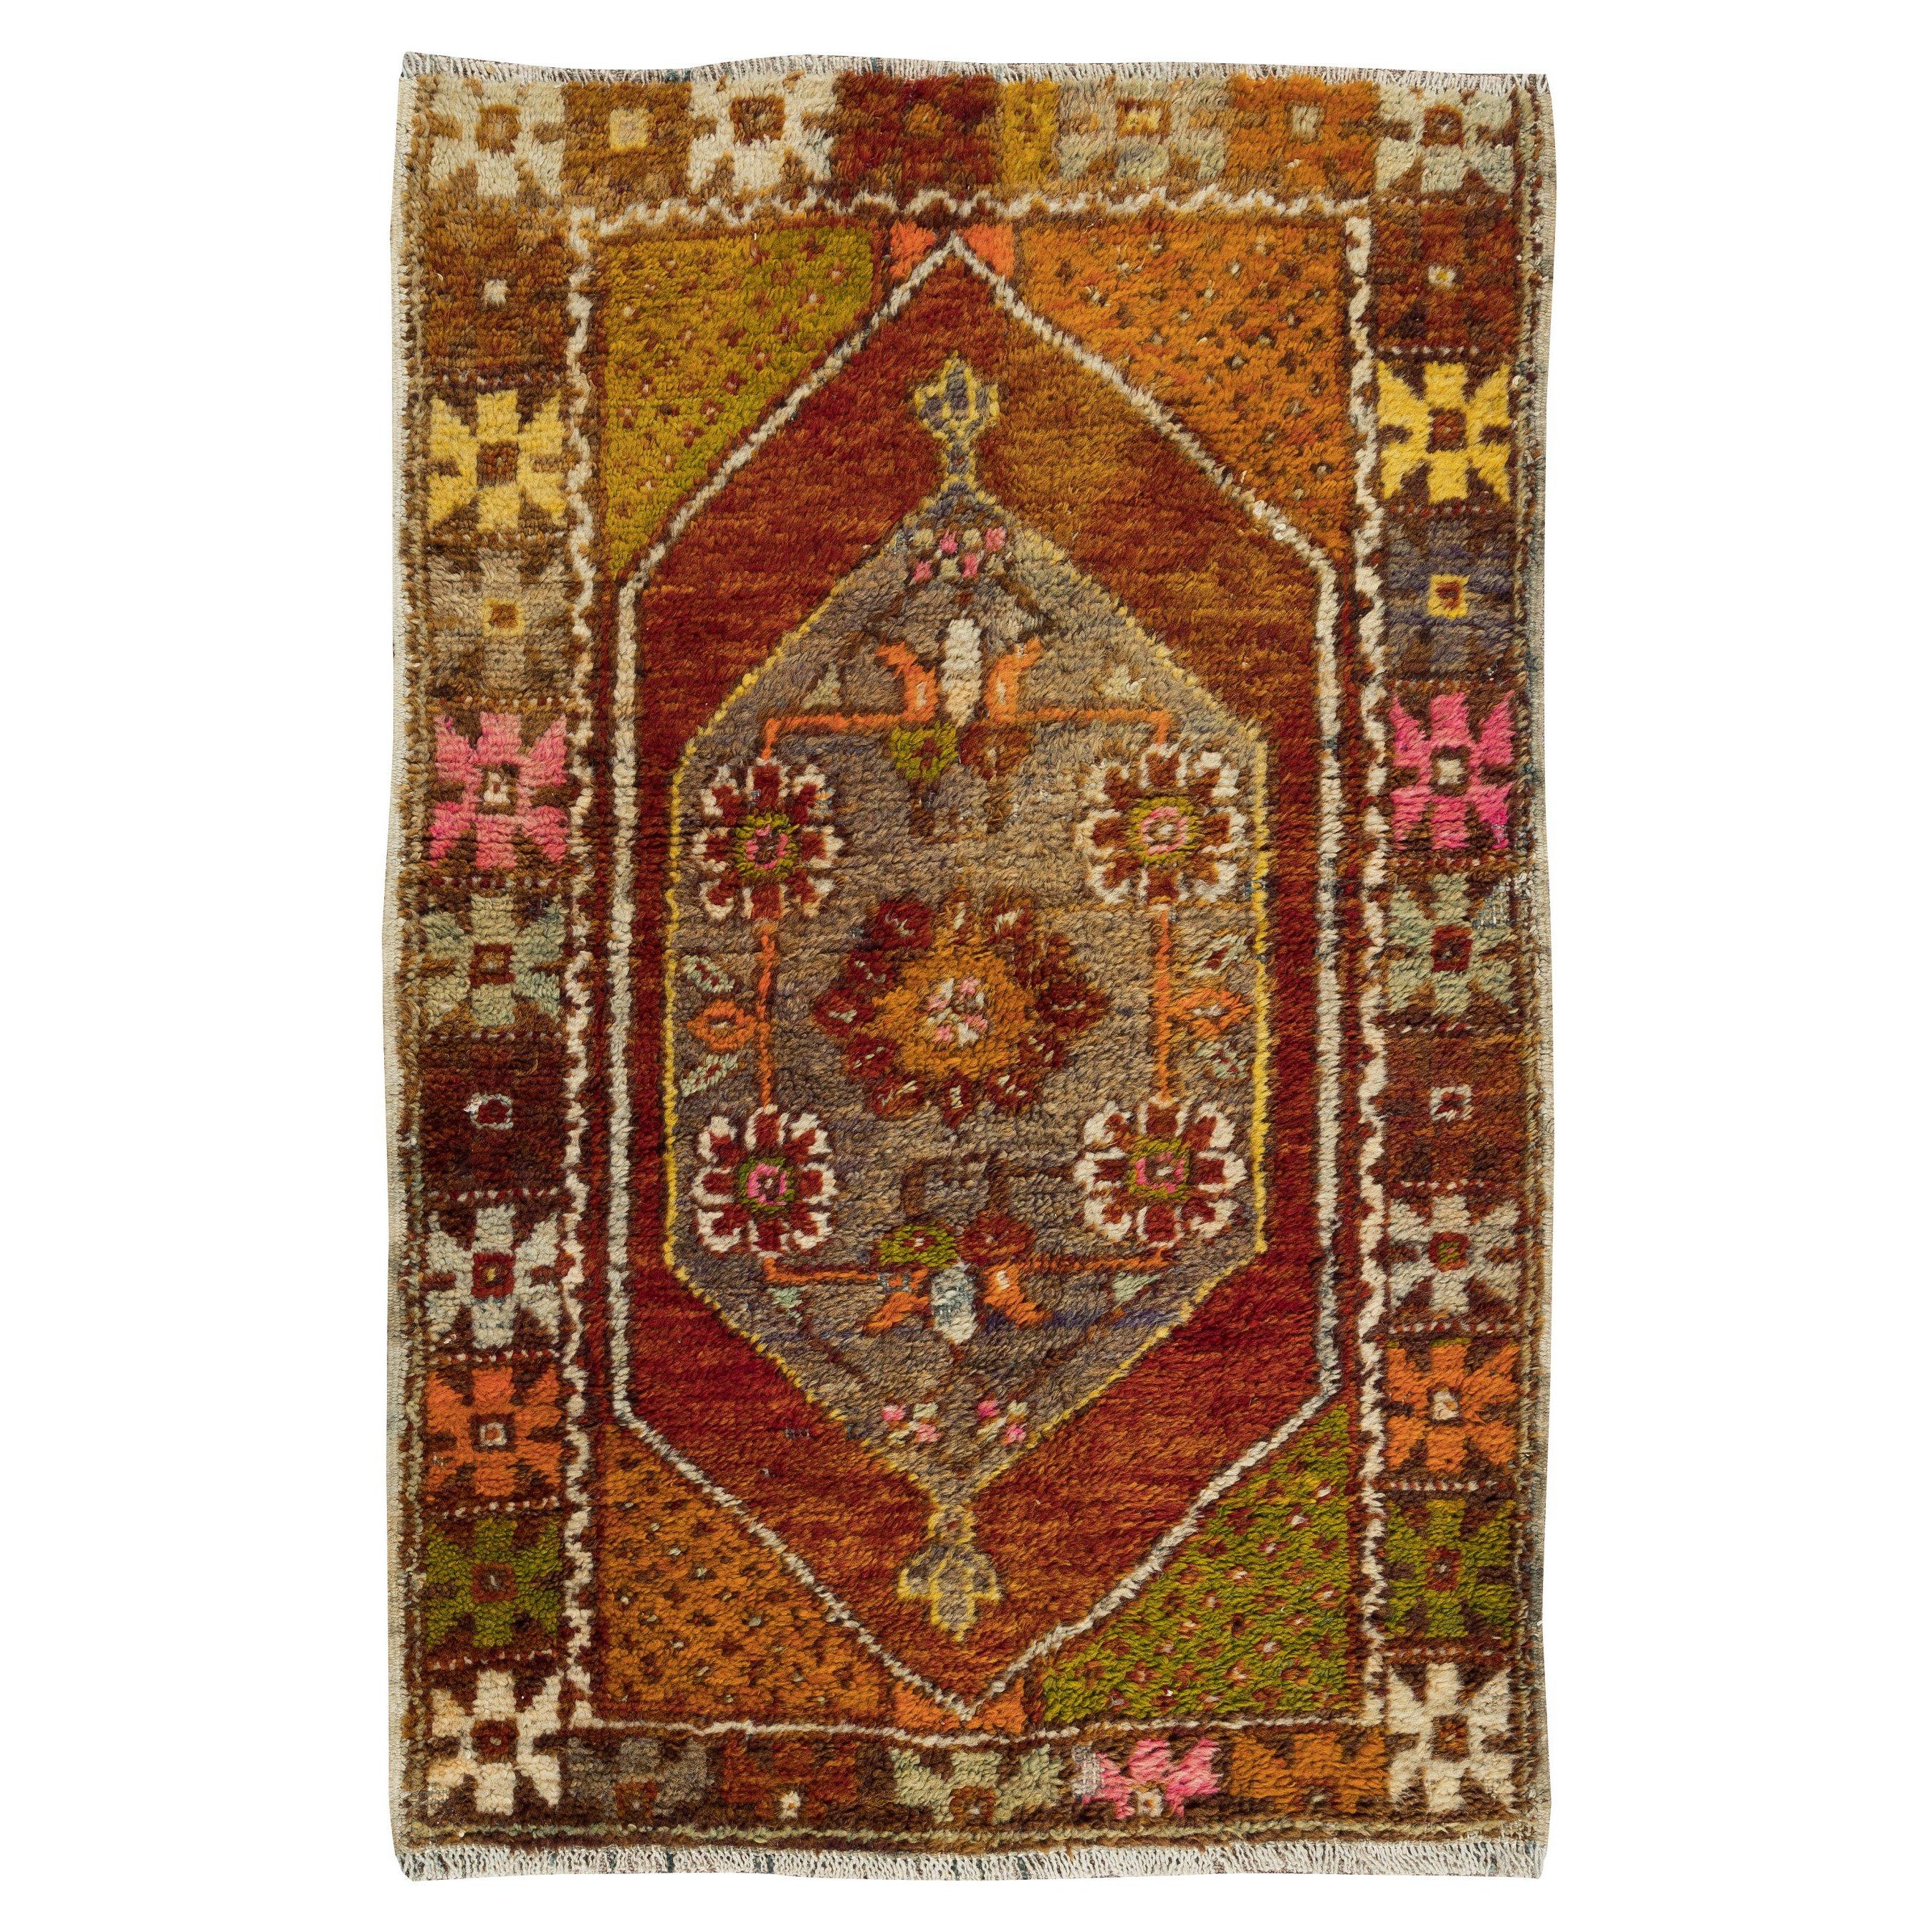 31"x46" Old Handmade Scatter Accent Rug with Floral Design. Wool Turkish Doormat